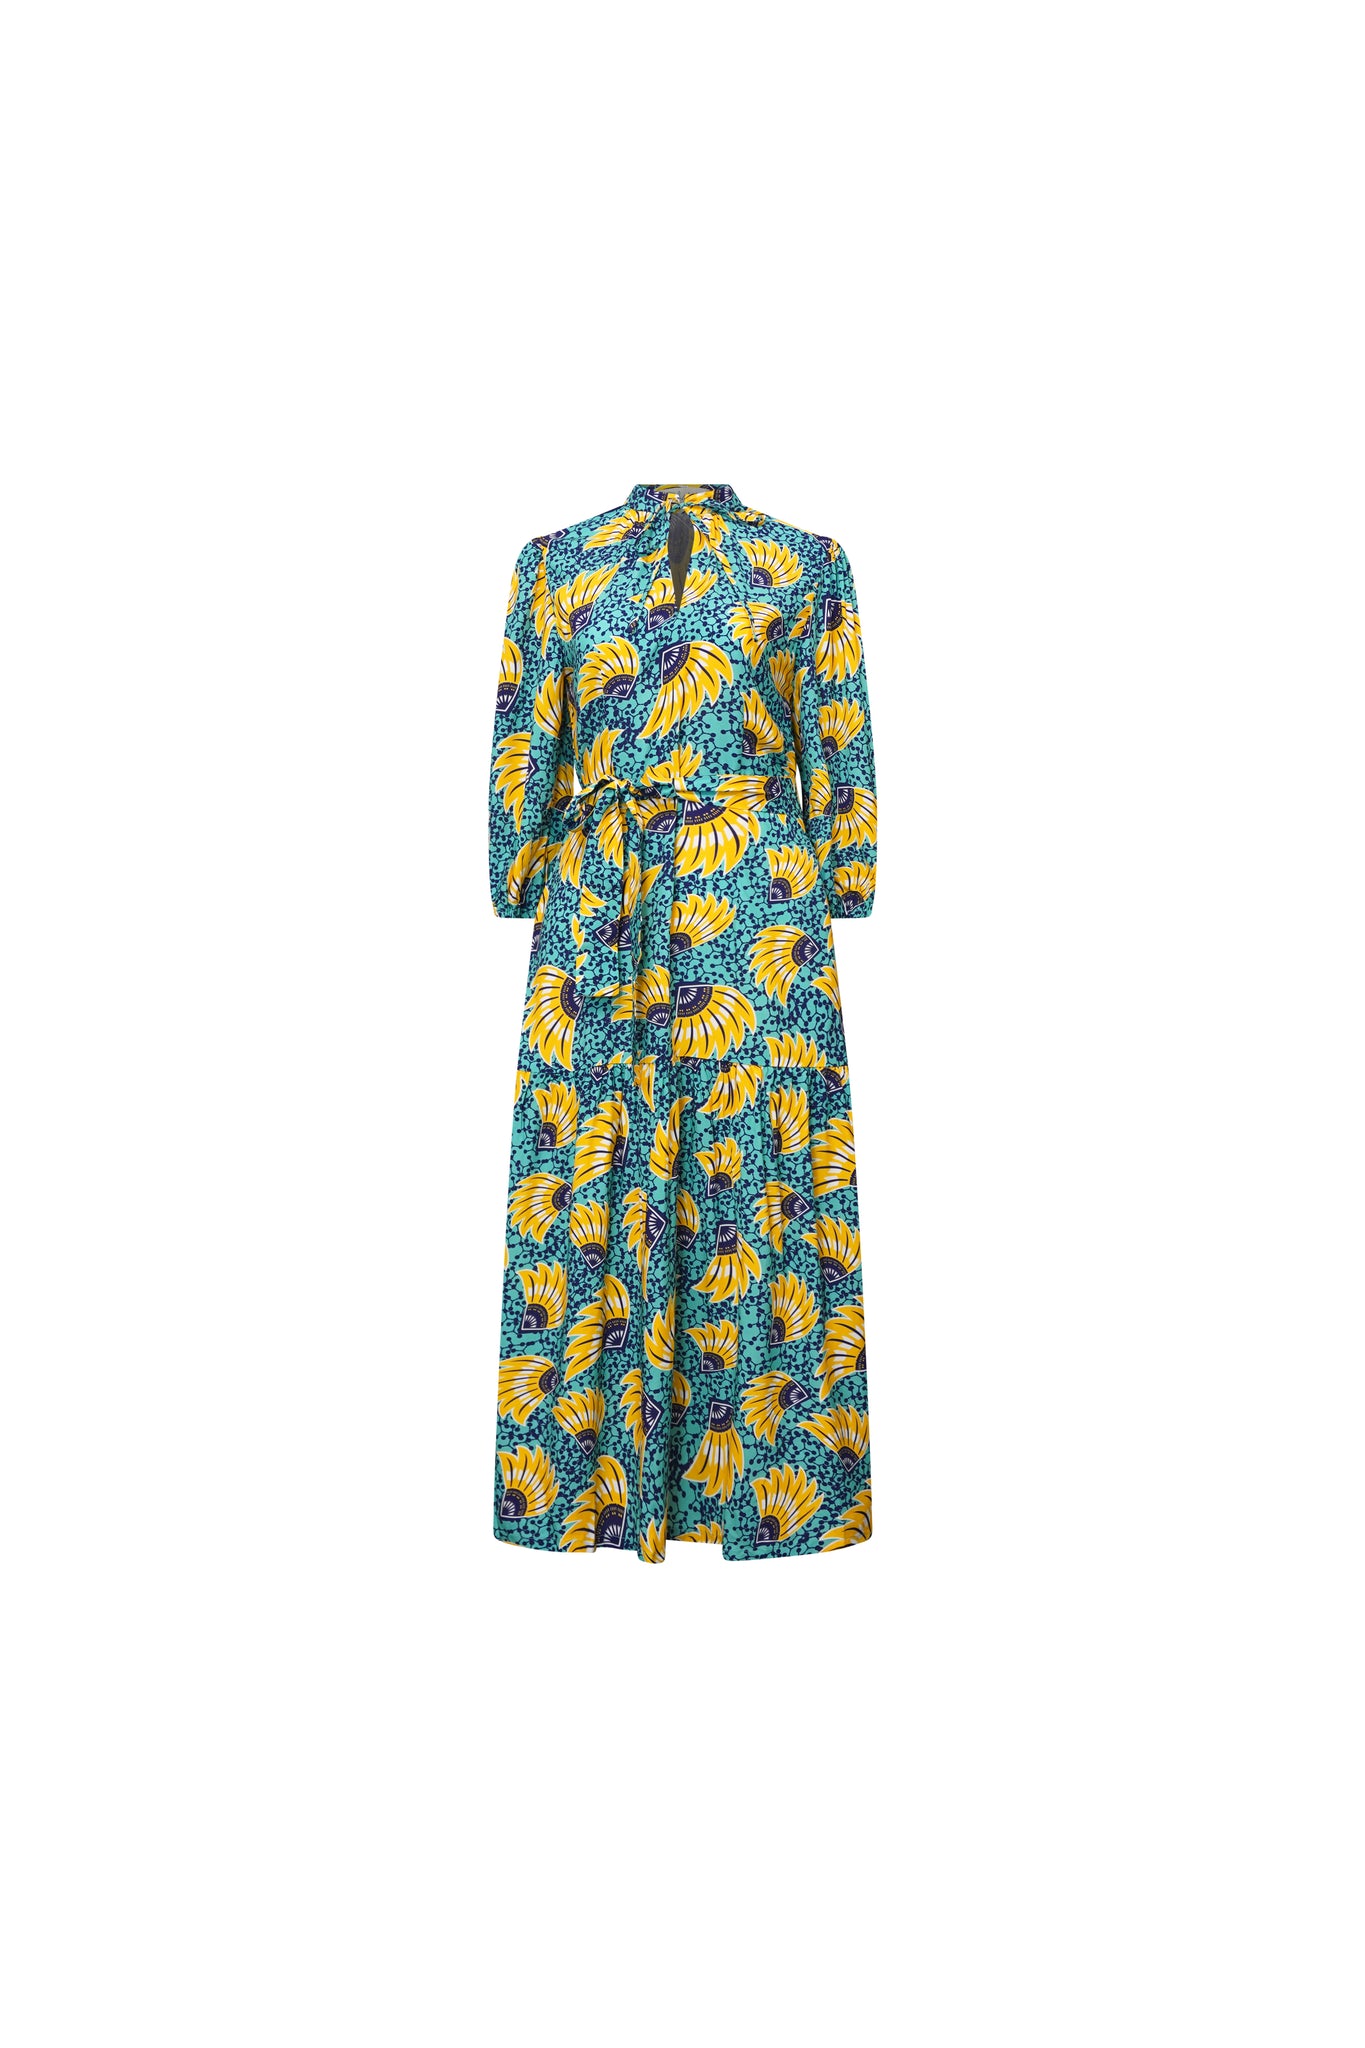 Yumna Dress with Puff Sleeves and High Neckline - Yellow Cyan Sunkissed Maized Print | ILC OA OG